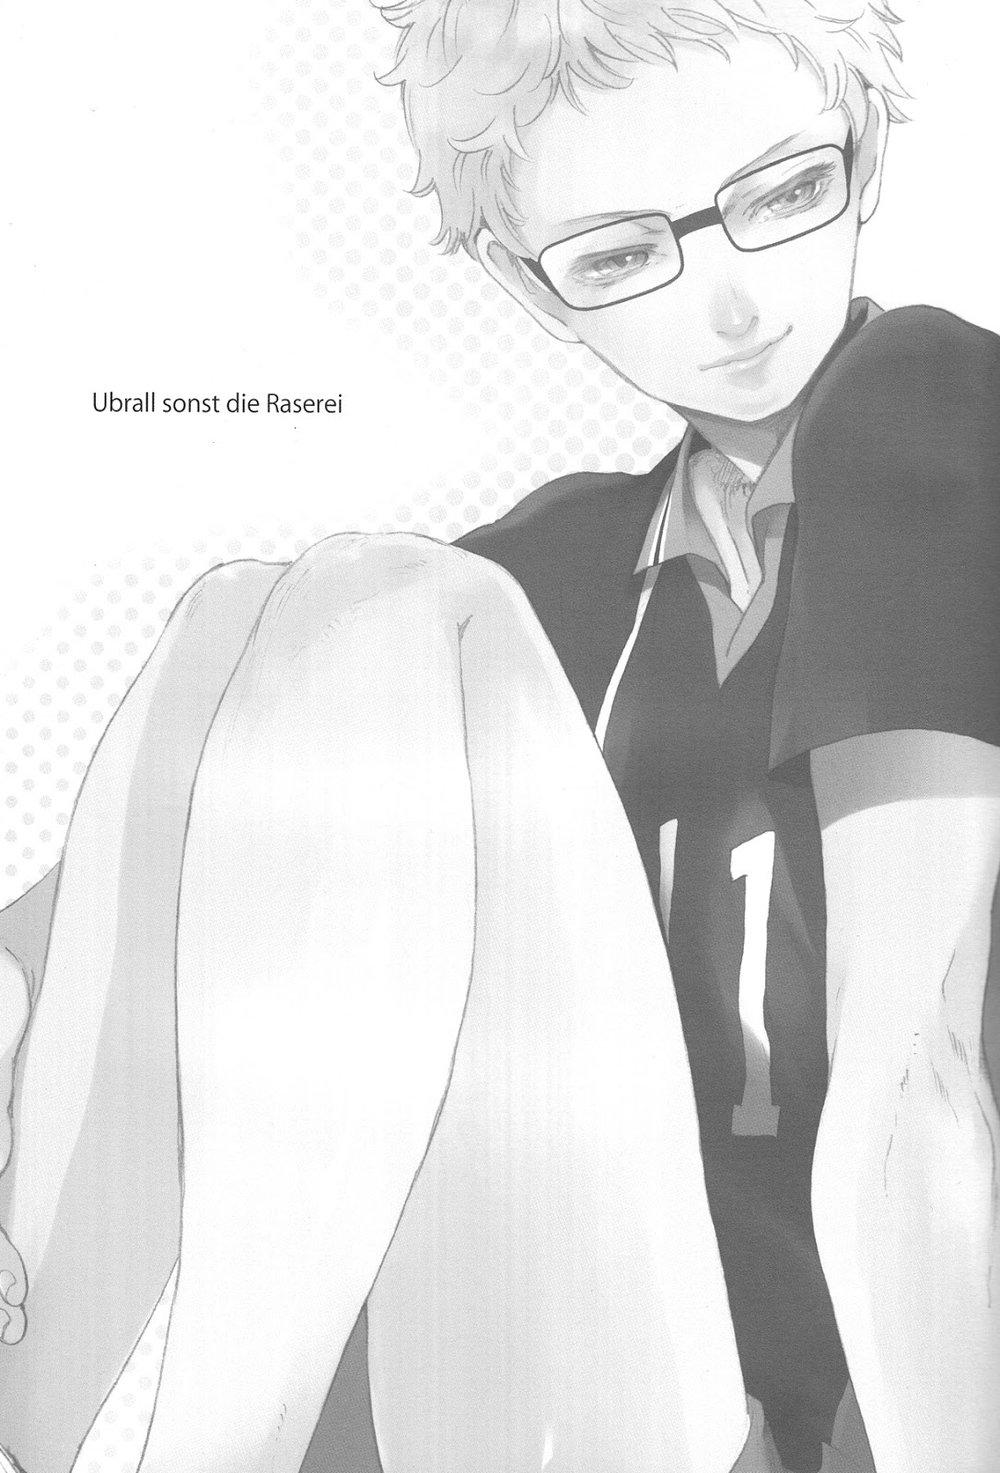 Squirting Ubrall sonst die Raserei - Haikyuu Young - Page 2